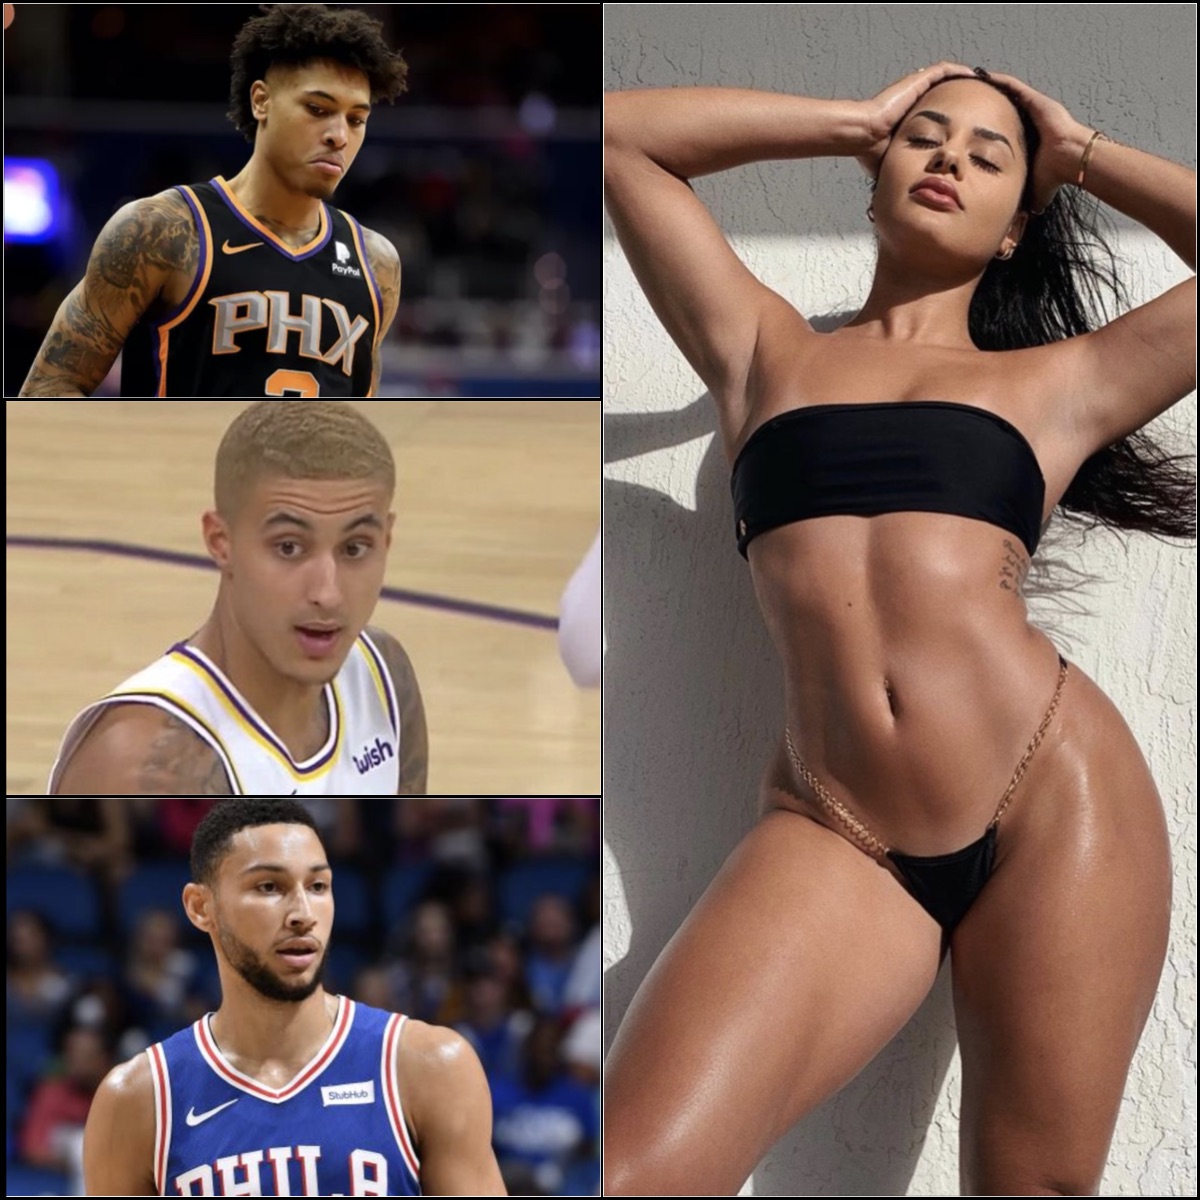 NBA players tend to date from the same pool of women, the Suns Kelly Oubre ...